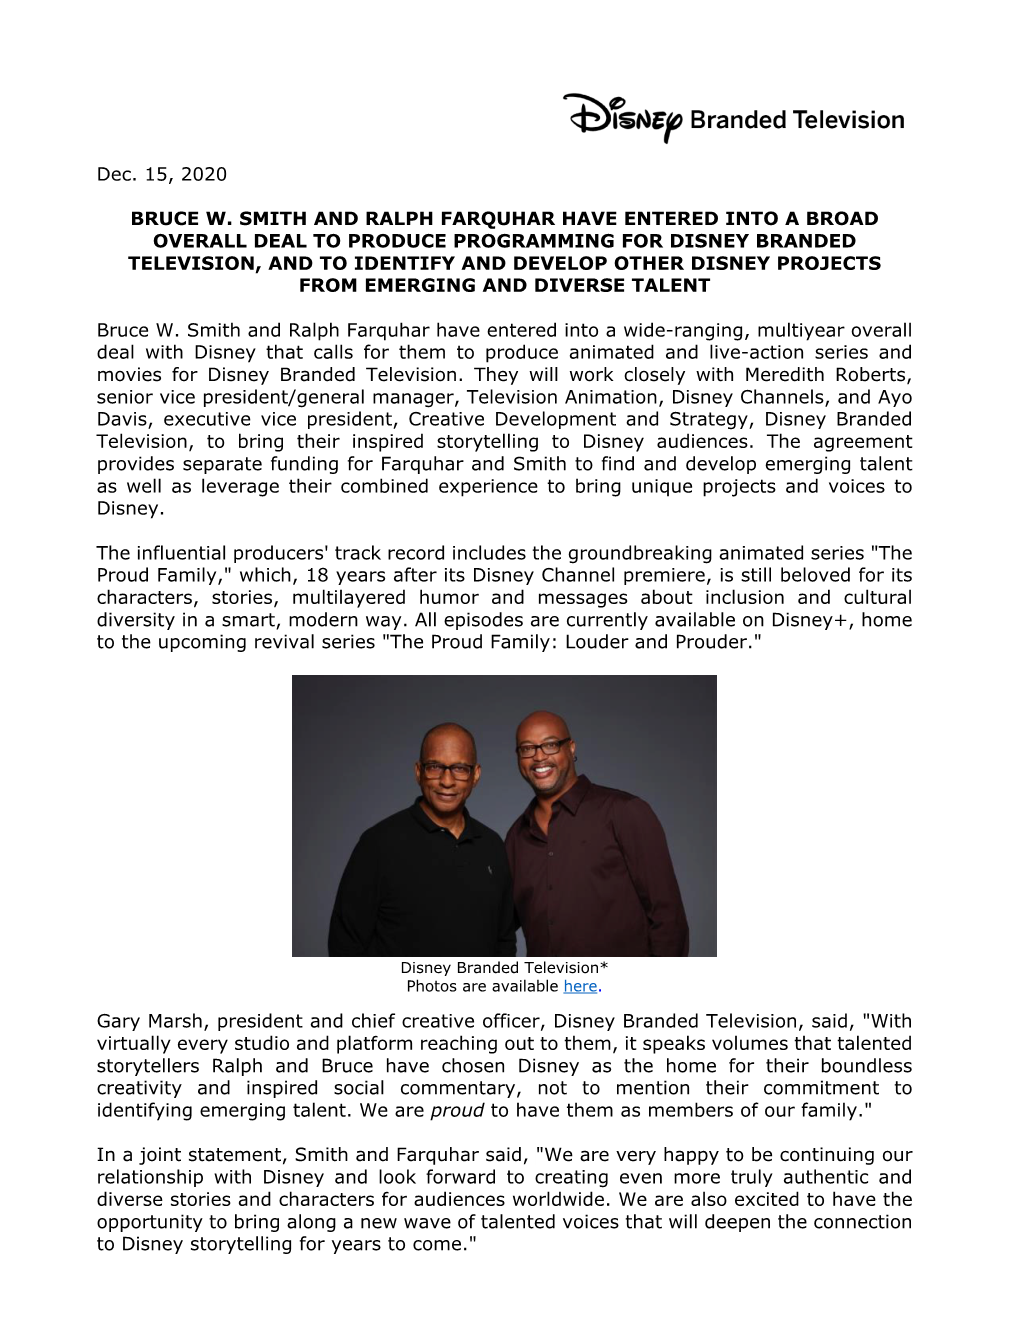 Dec. 15, 2020 BRUCE W. SMITH and RALPH FARQUHAR HAVE ENTERED INTO a BROAD OVERALL DEAL to PRODUCE PROGRAMMING for DISNEY BRANDED